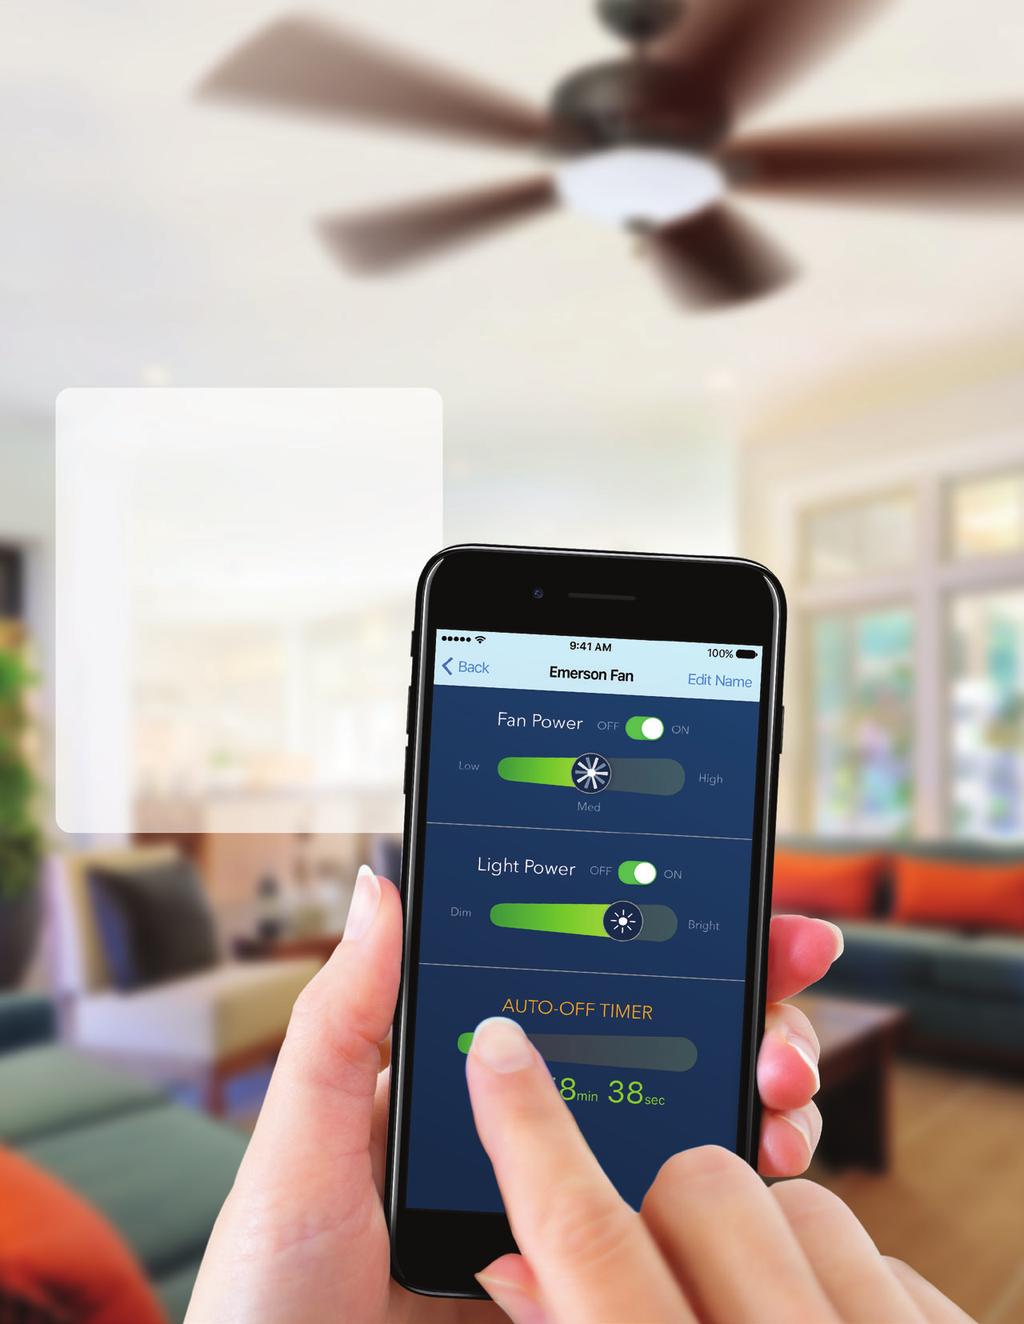 NEW! Bluetooth Ceiling Fan Control with App RCBT100 Bluetooth Technology - Control Your Ceiling Fan with your Apple or Android device with the Free Emerson Ceiling Fan App App controls compatible